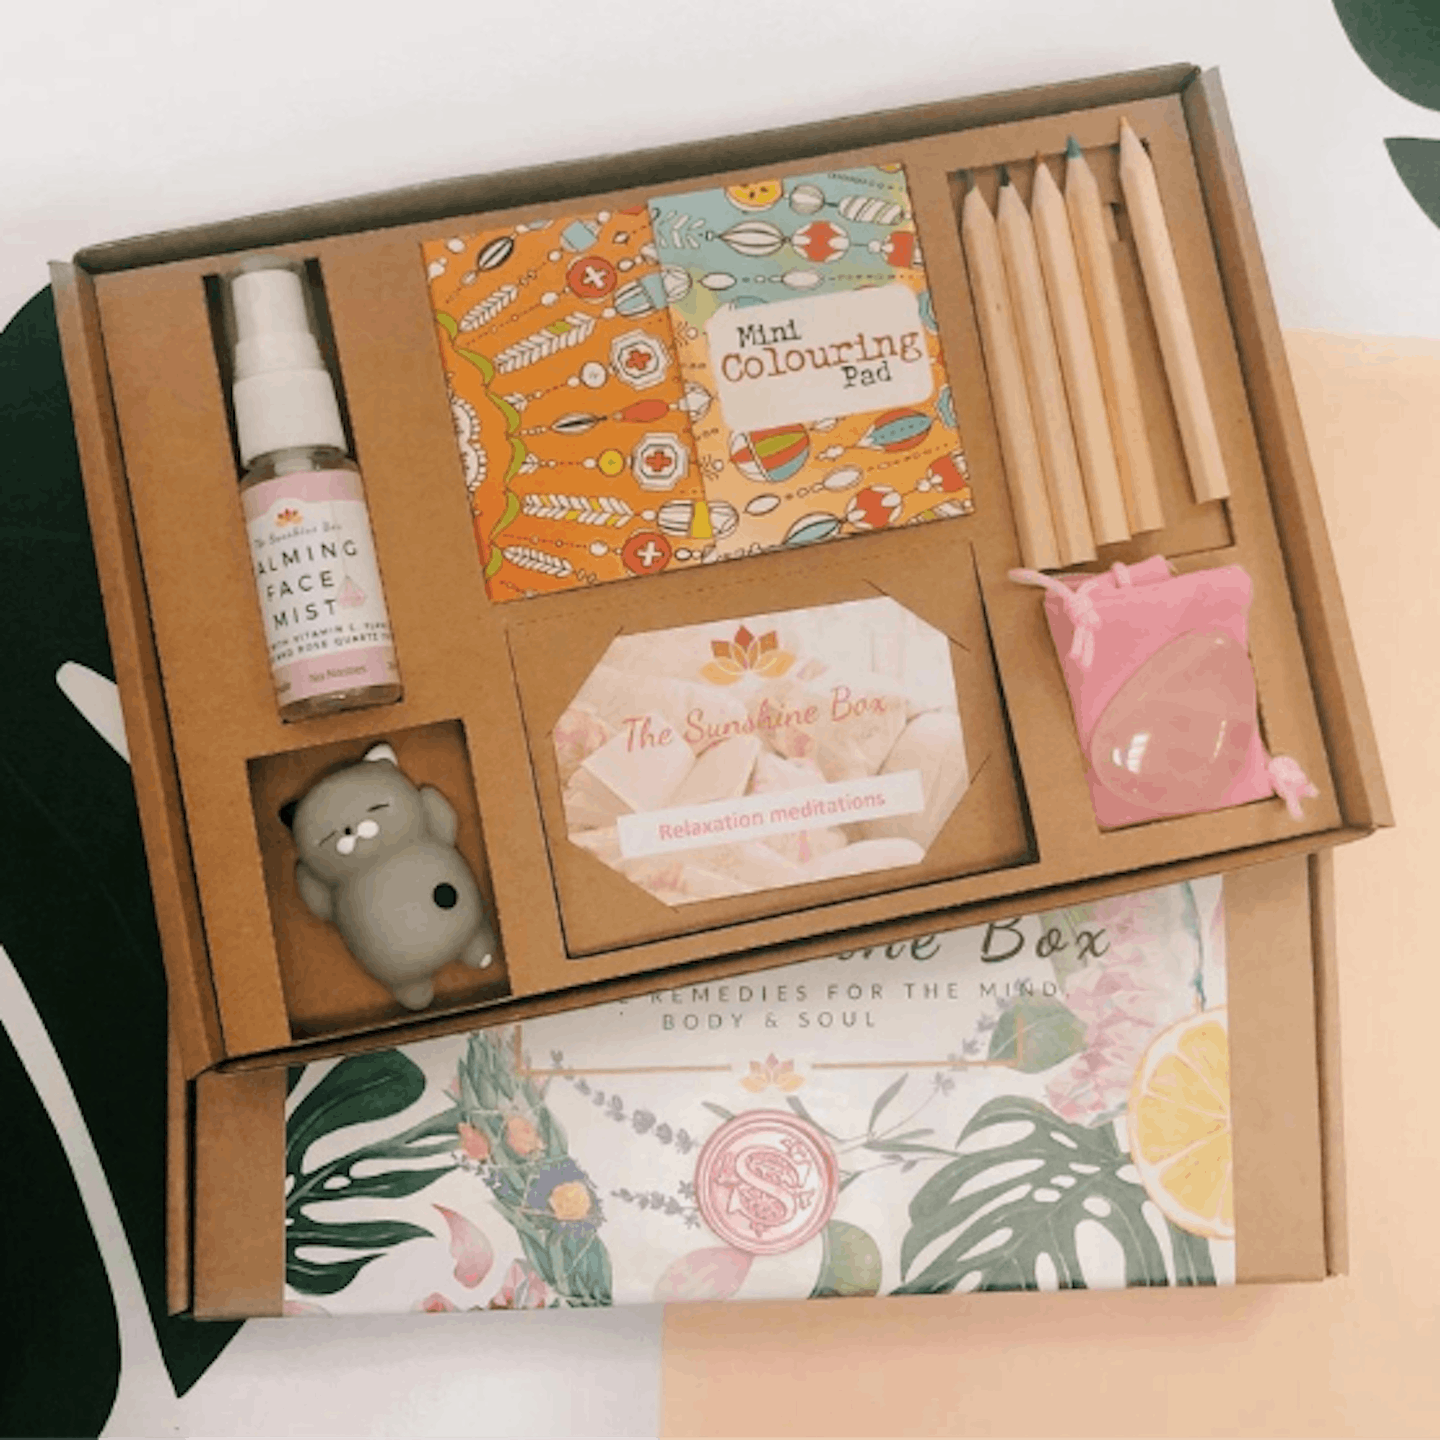 Subscription gifts wellbeing box